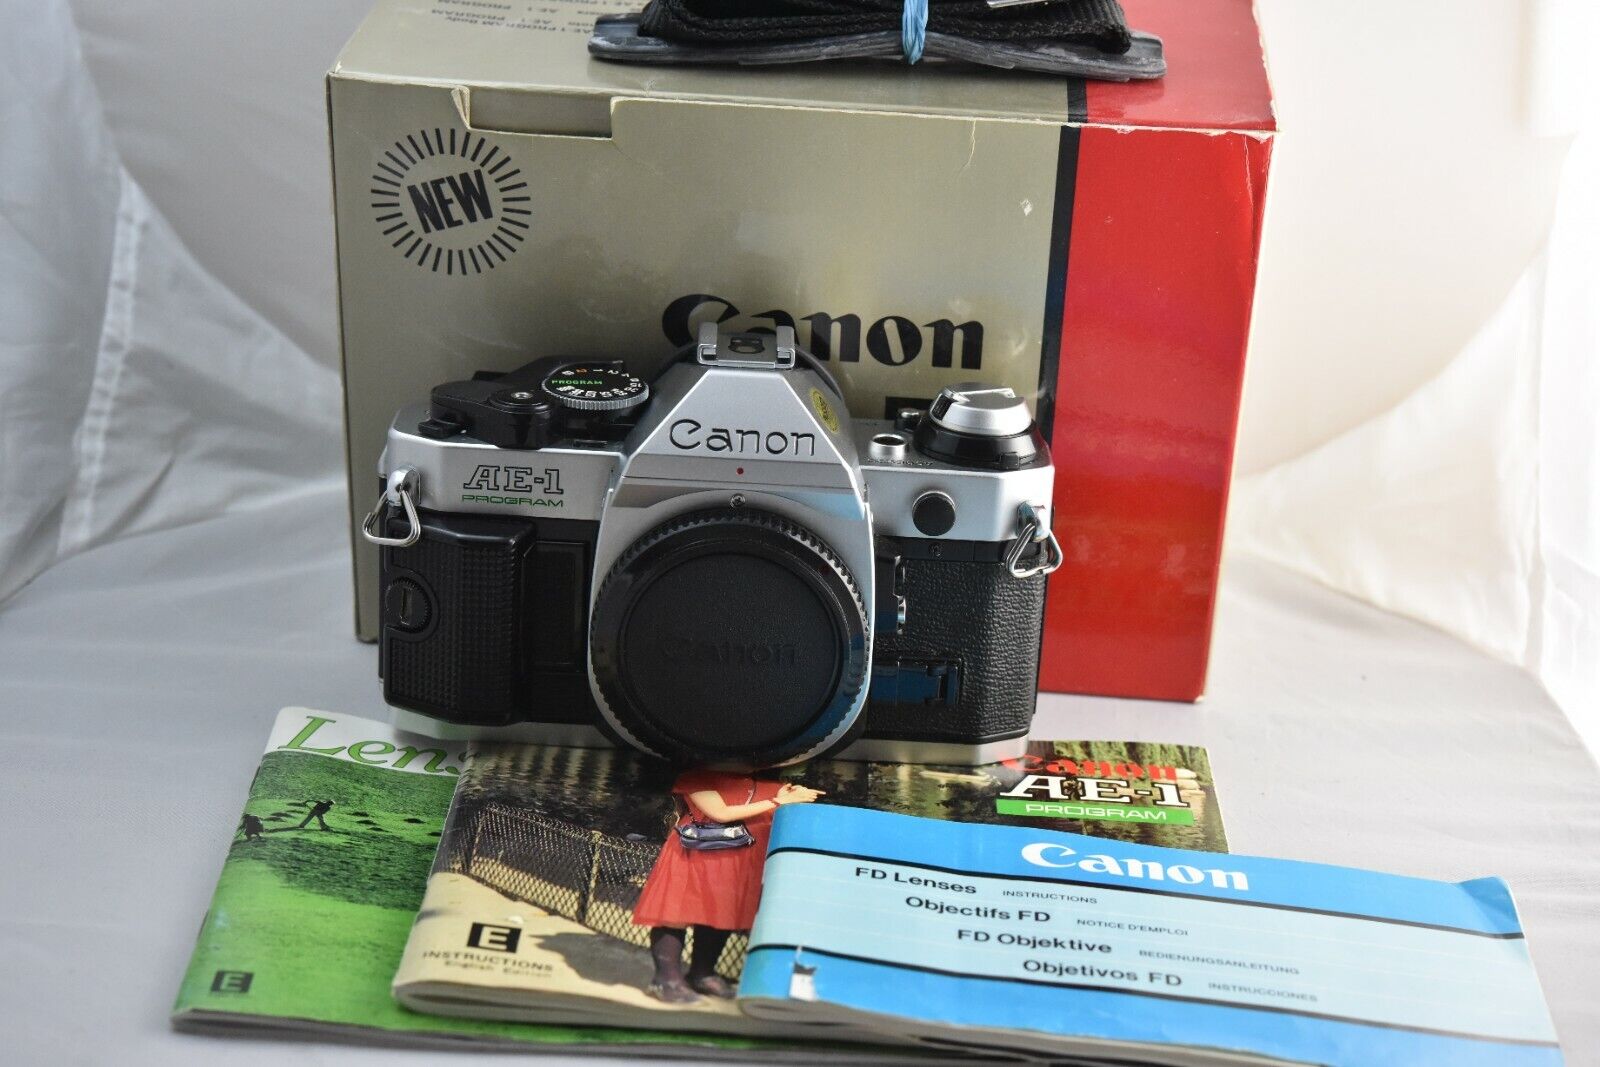 haakje rem wees onder de indruk Canon AE-1 Program, mint, includes box, manual and paper works | eBay